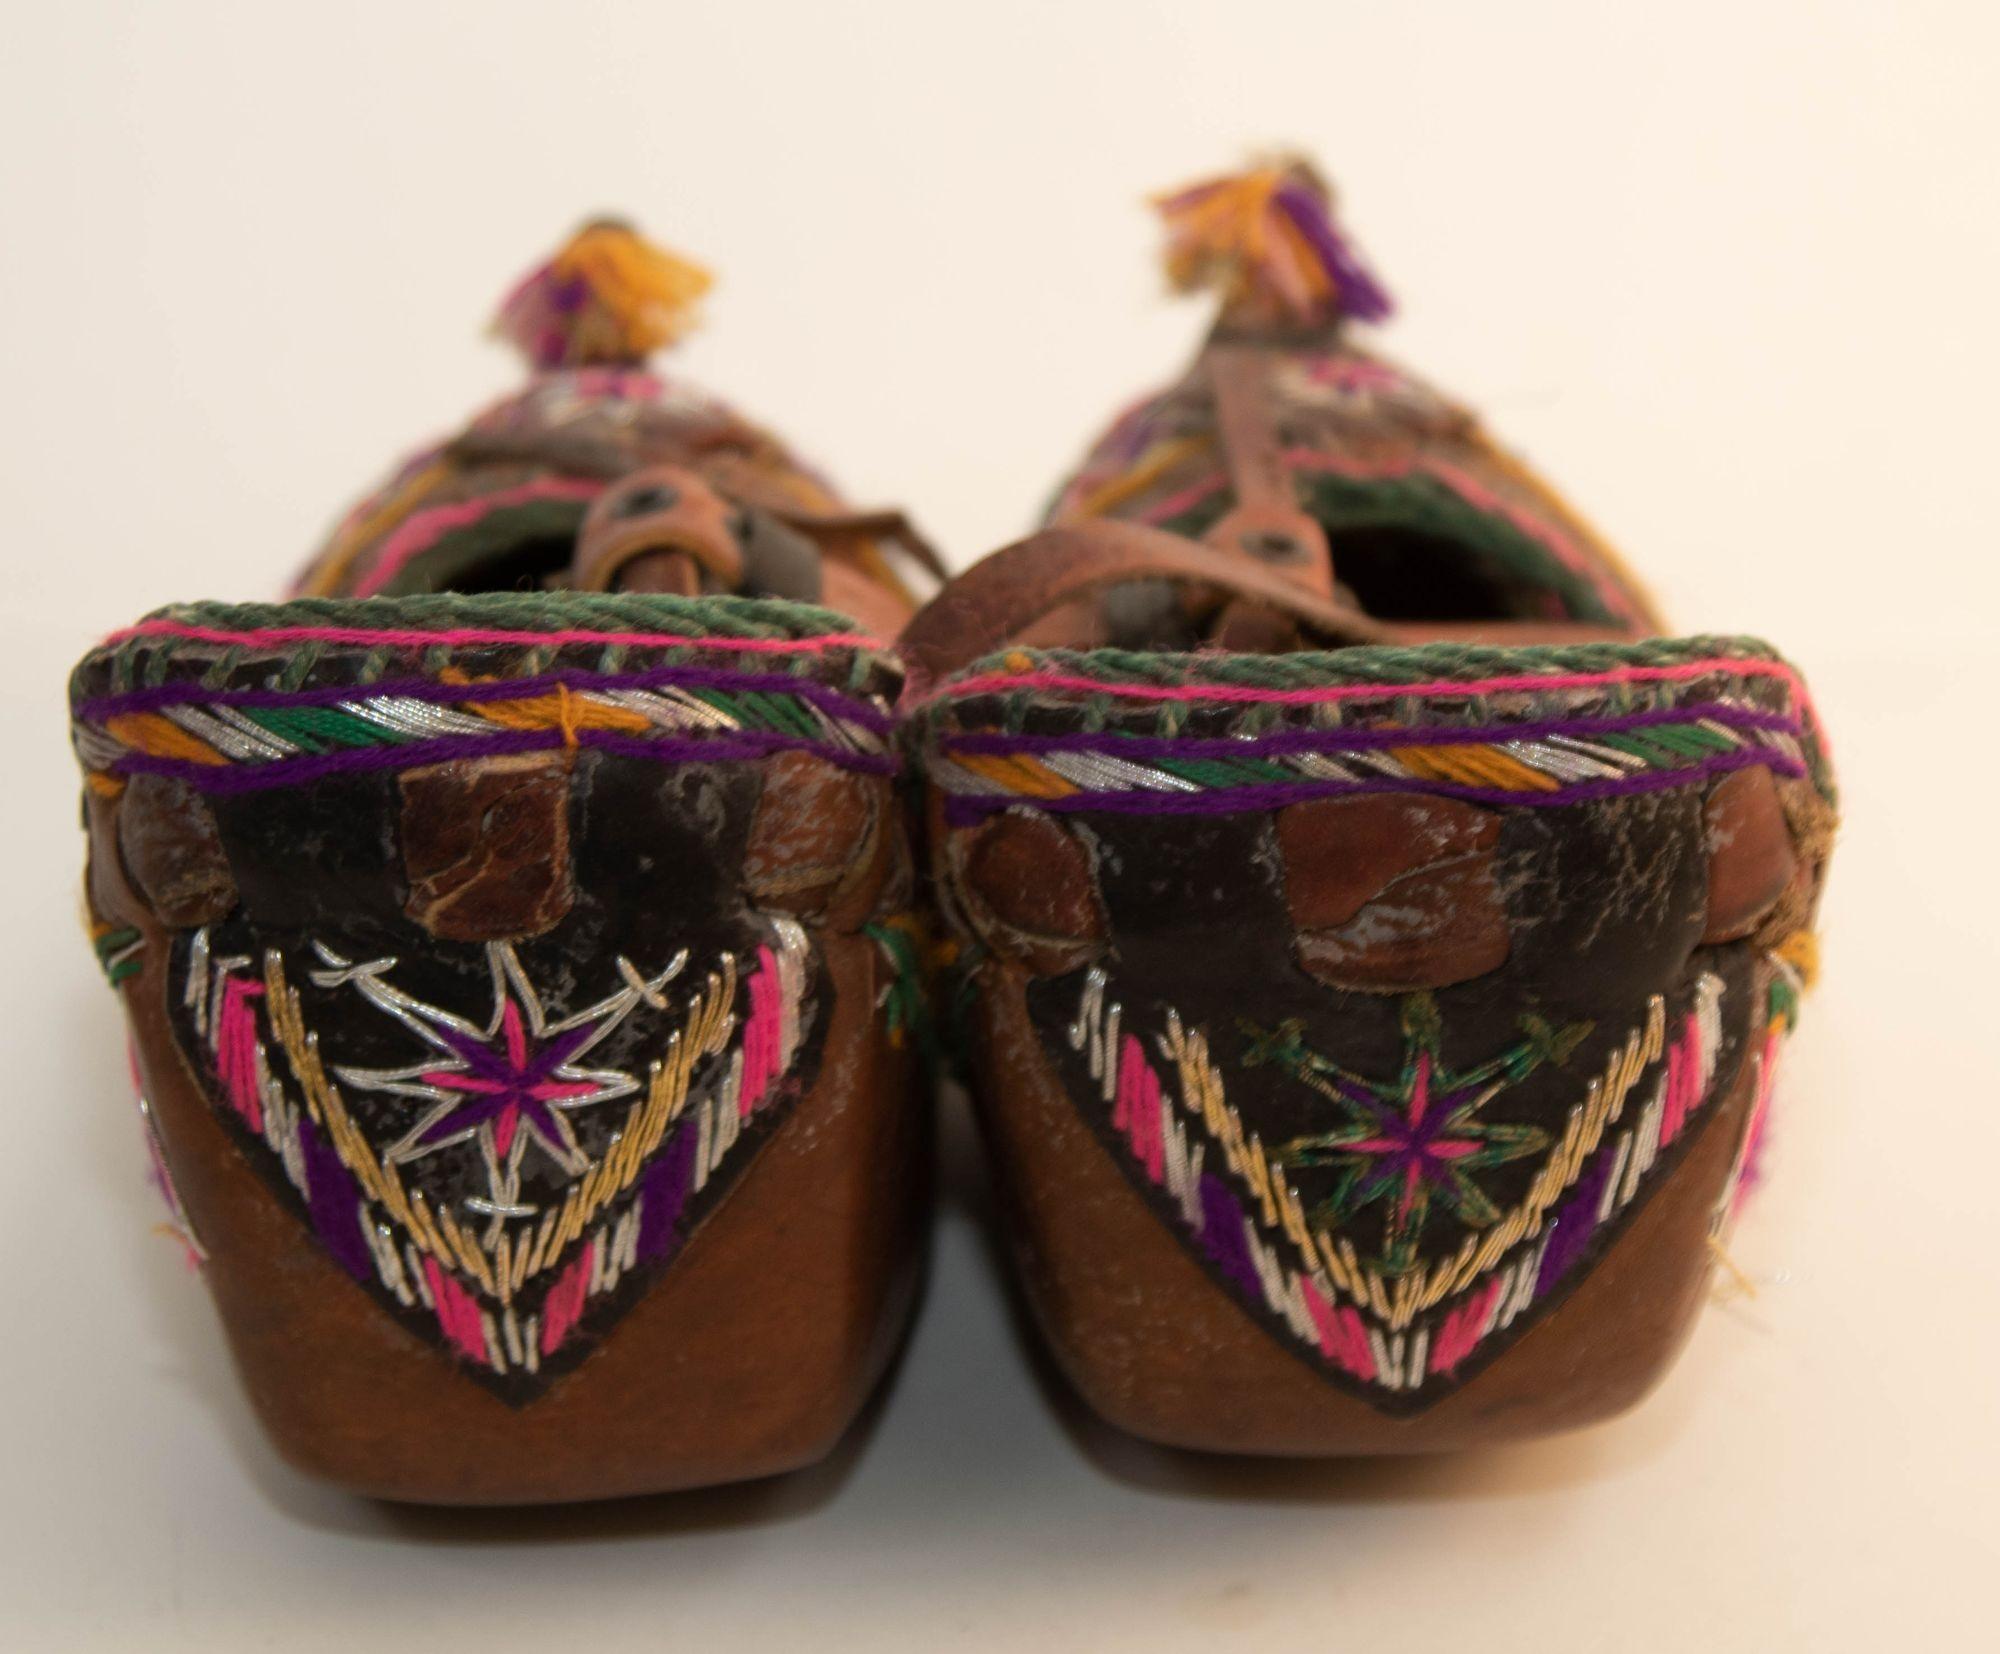 Antique Pair of Charogh Ethnic Shoes from Turkey.
These collectible Museum Kurdish shoes are known as charoghs and were made in Khorasan province in north western Turkey.
Hand-crafted and made from a single piece of rawhide, this type of shoe is